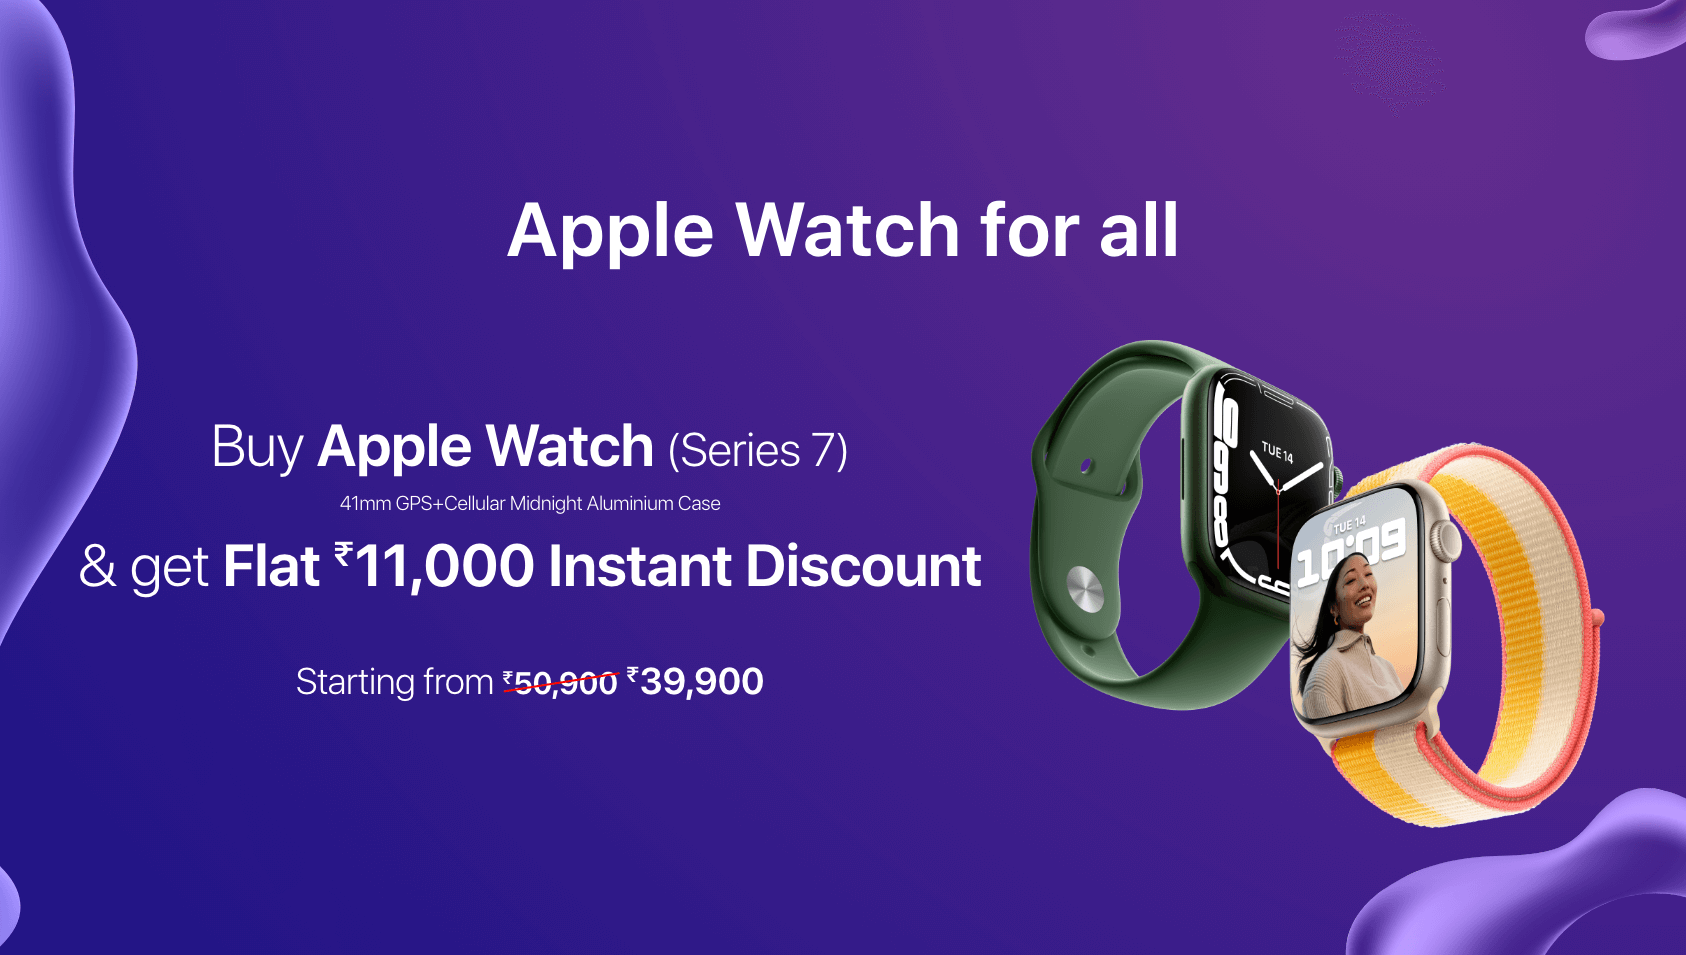 Exclusive Offers on Apple Products